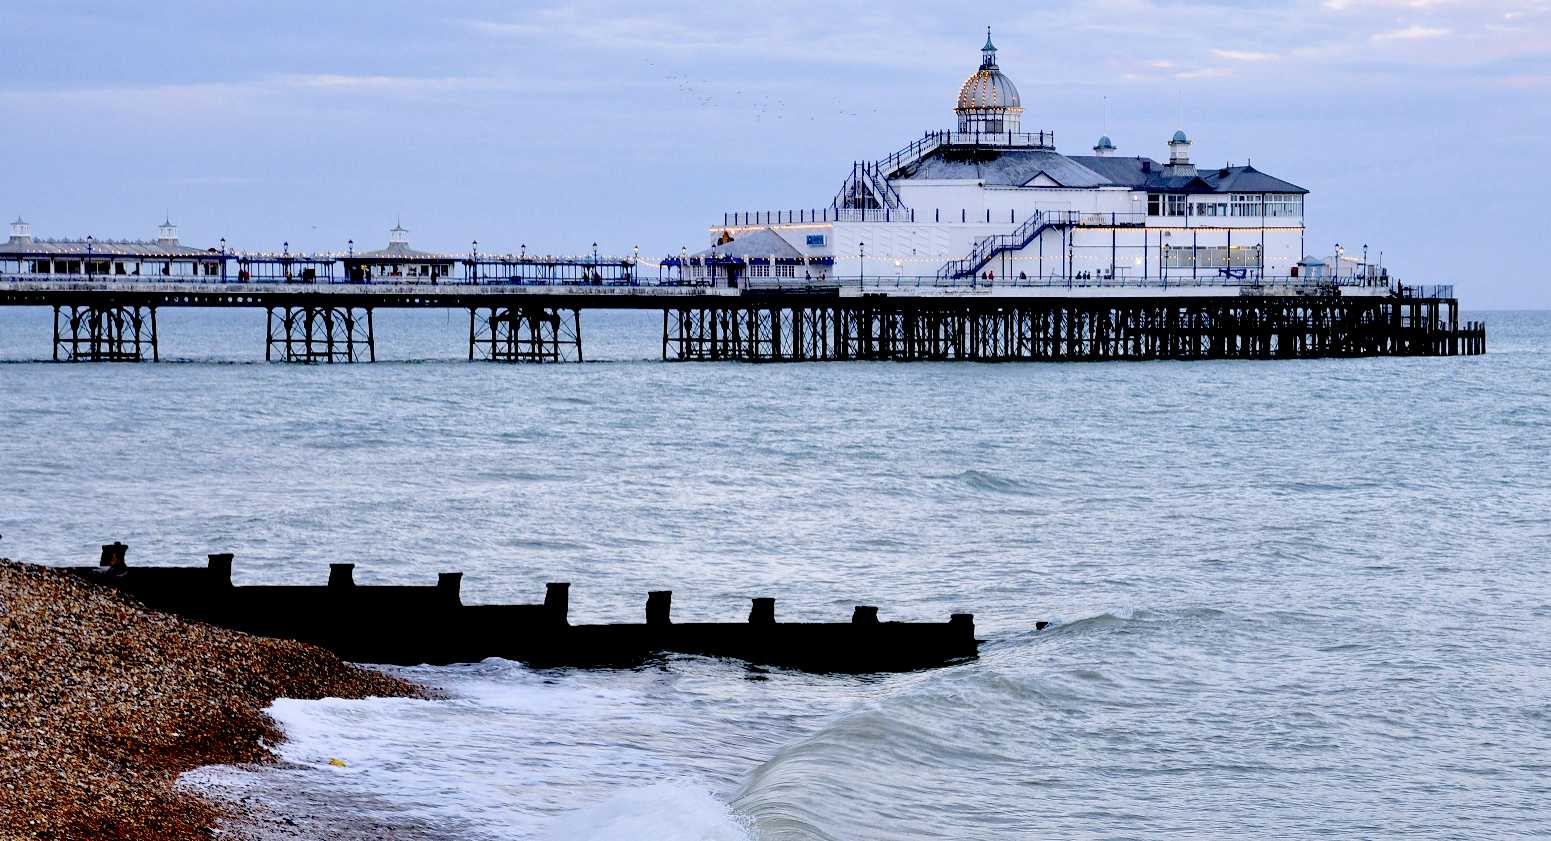 Eastbourne Pier is a monument at risk